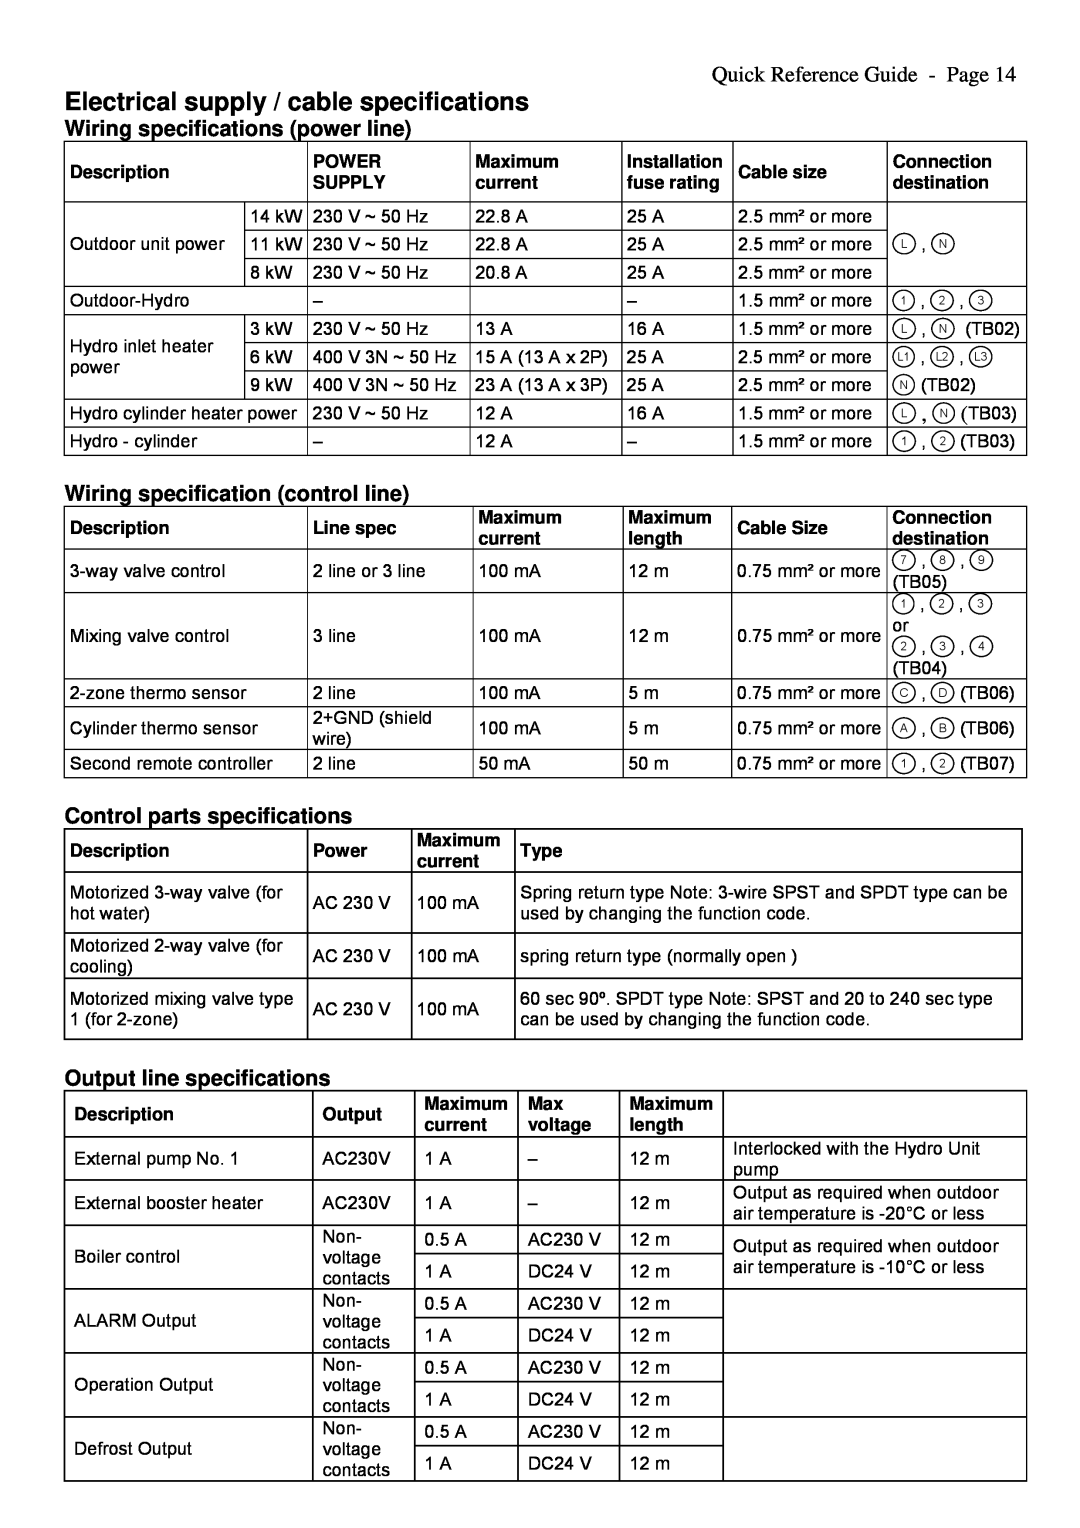 Toshiba A09-01P Electrical supply / cable specifications, Quick Reference Guide - Page, Wiring specifications power line 